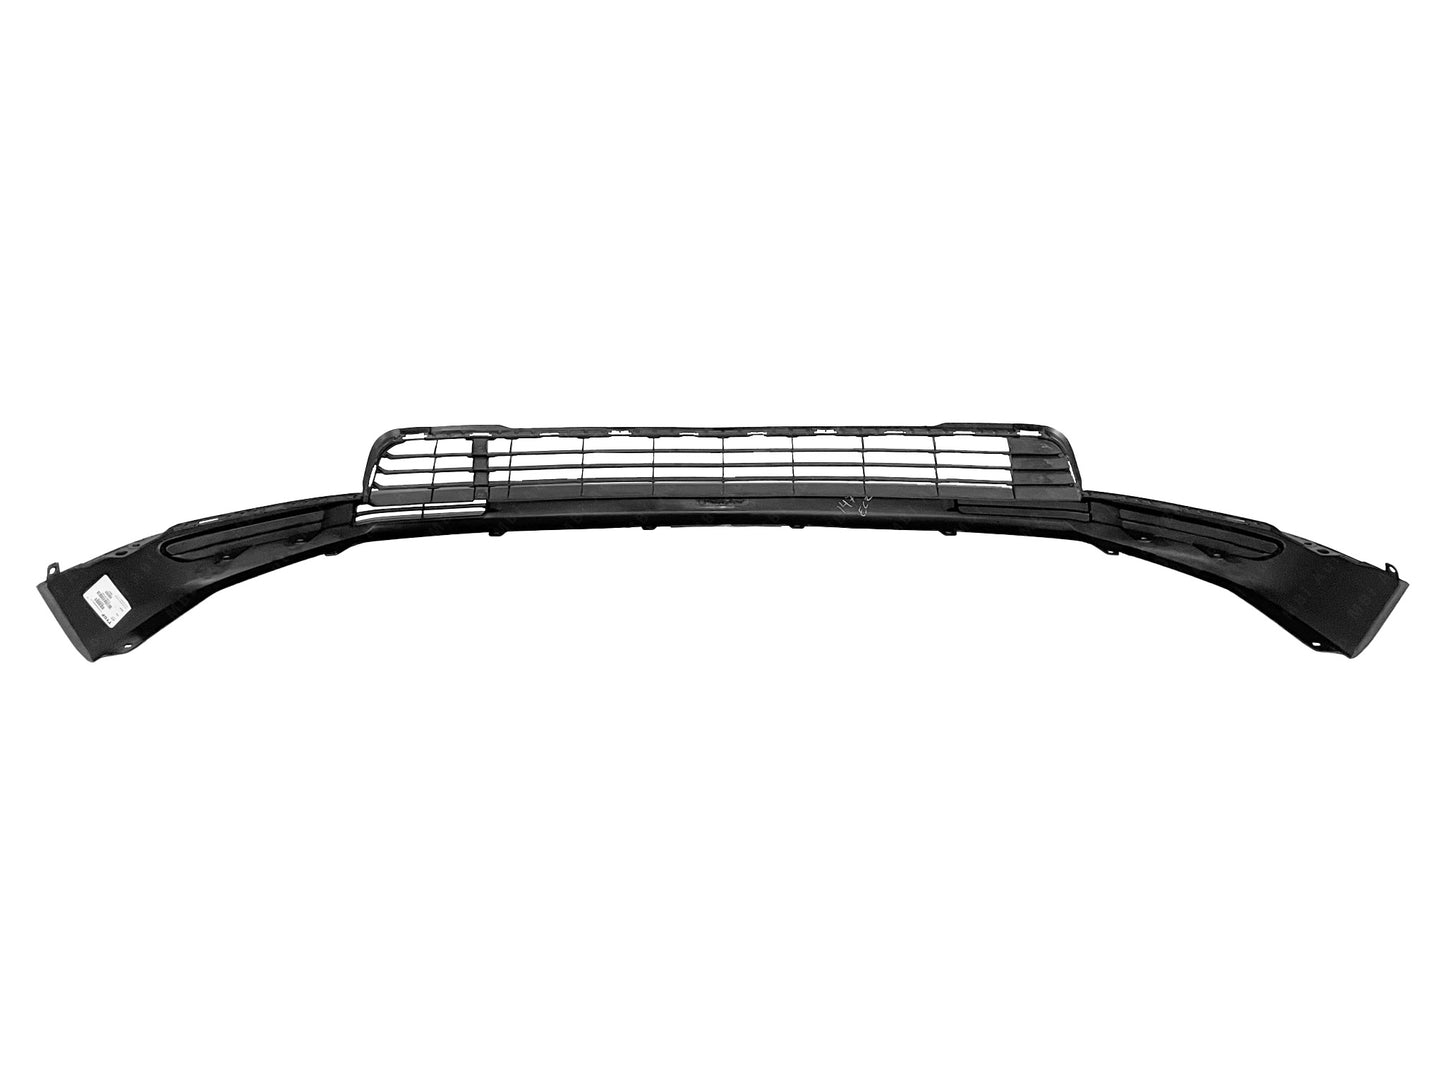 Toyota Highlander 2014 - 2017 Front Textured Lower Valance 14 - 17 TO1015110 Bumper King